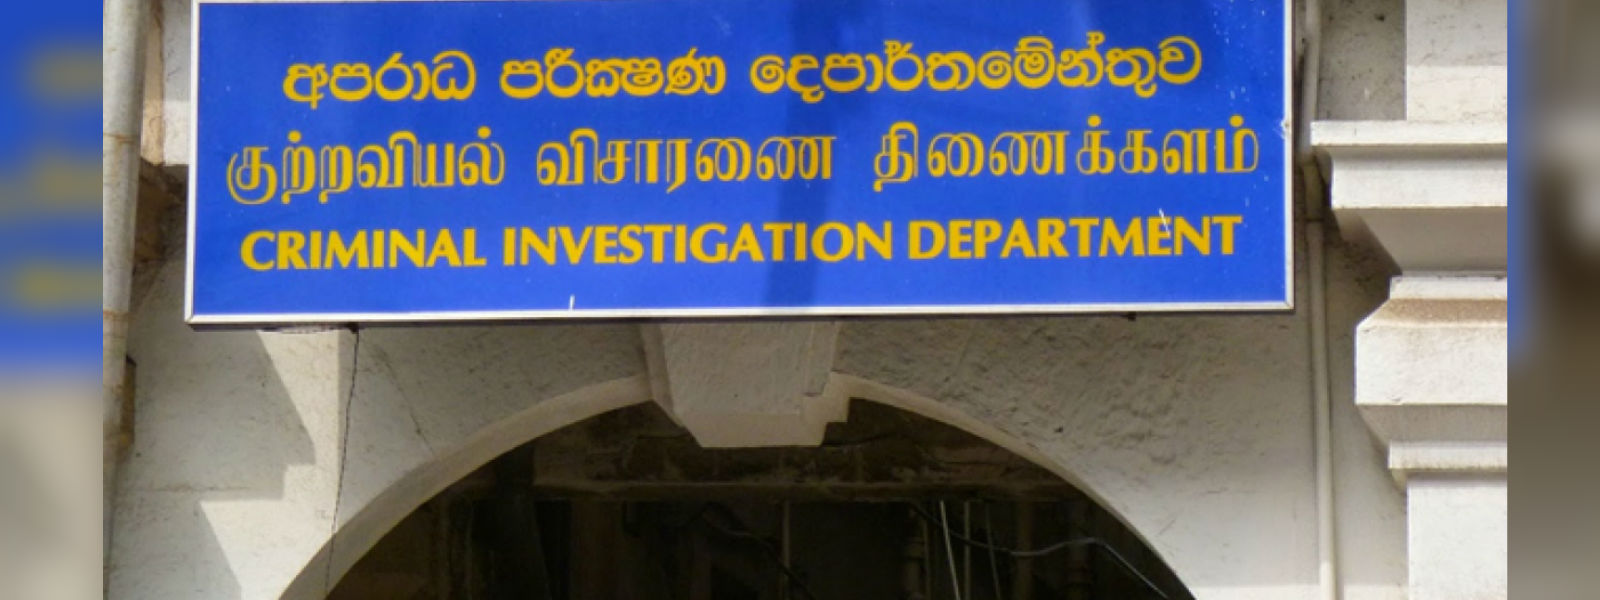 Swiss embassy employee summoned to the CID again